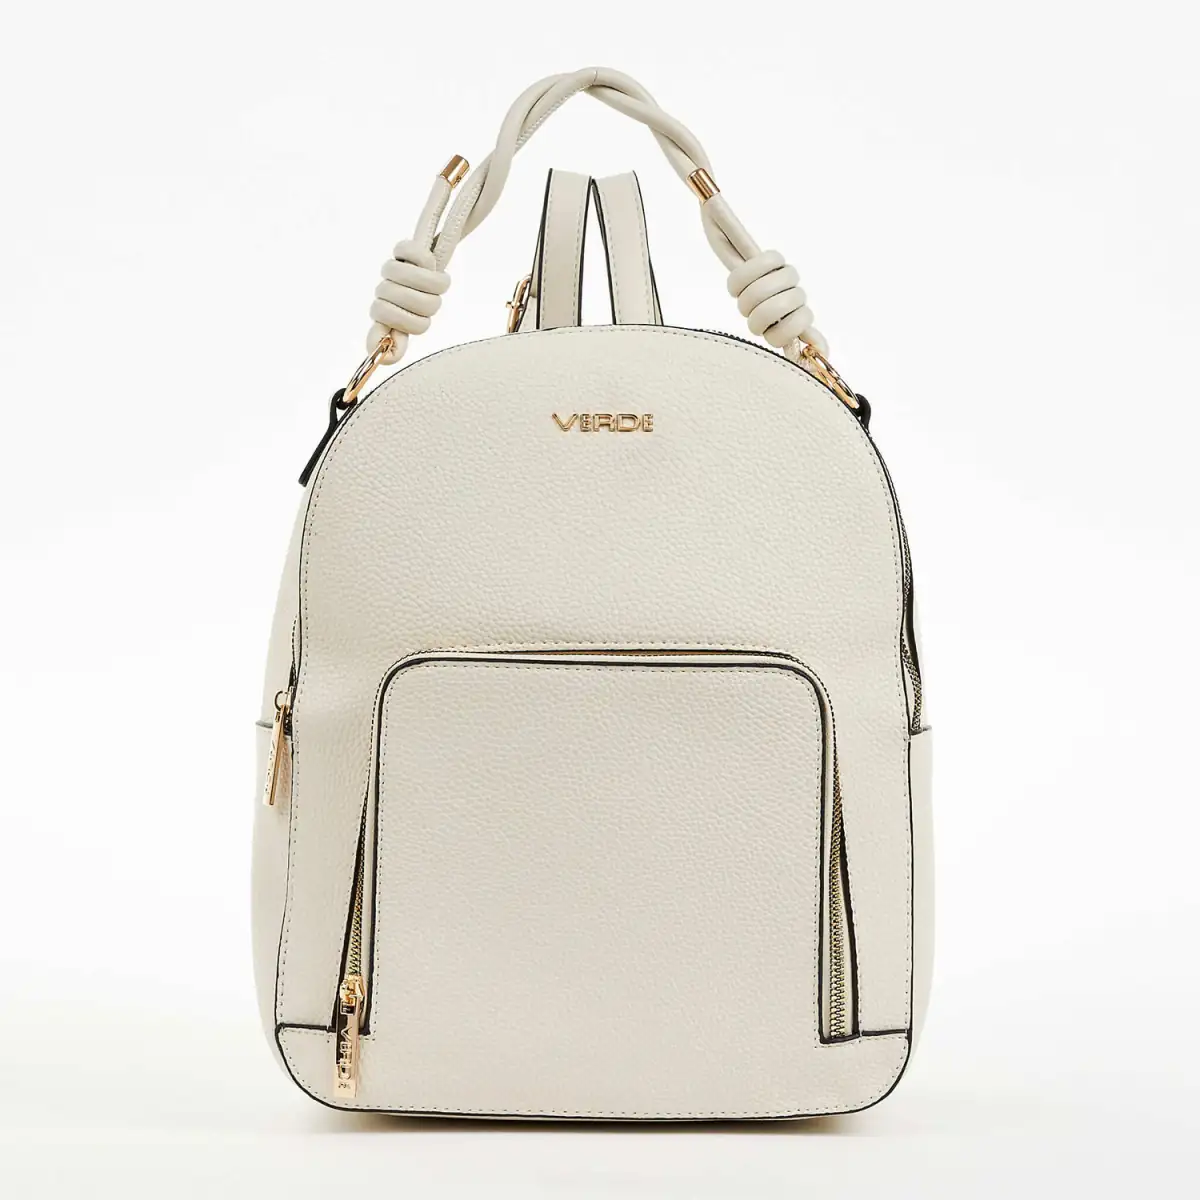 Birch White Leather Backpack | Meanwhile Back on the Farm